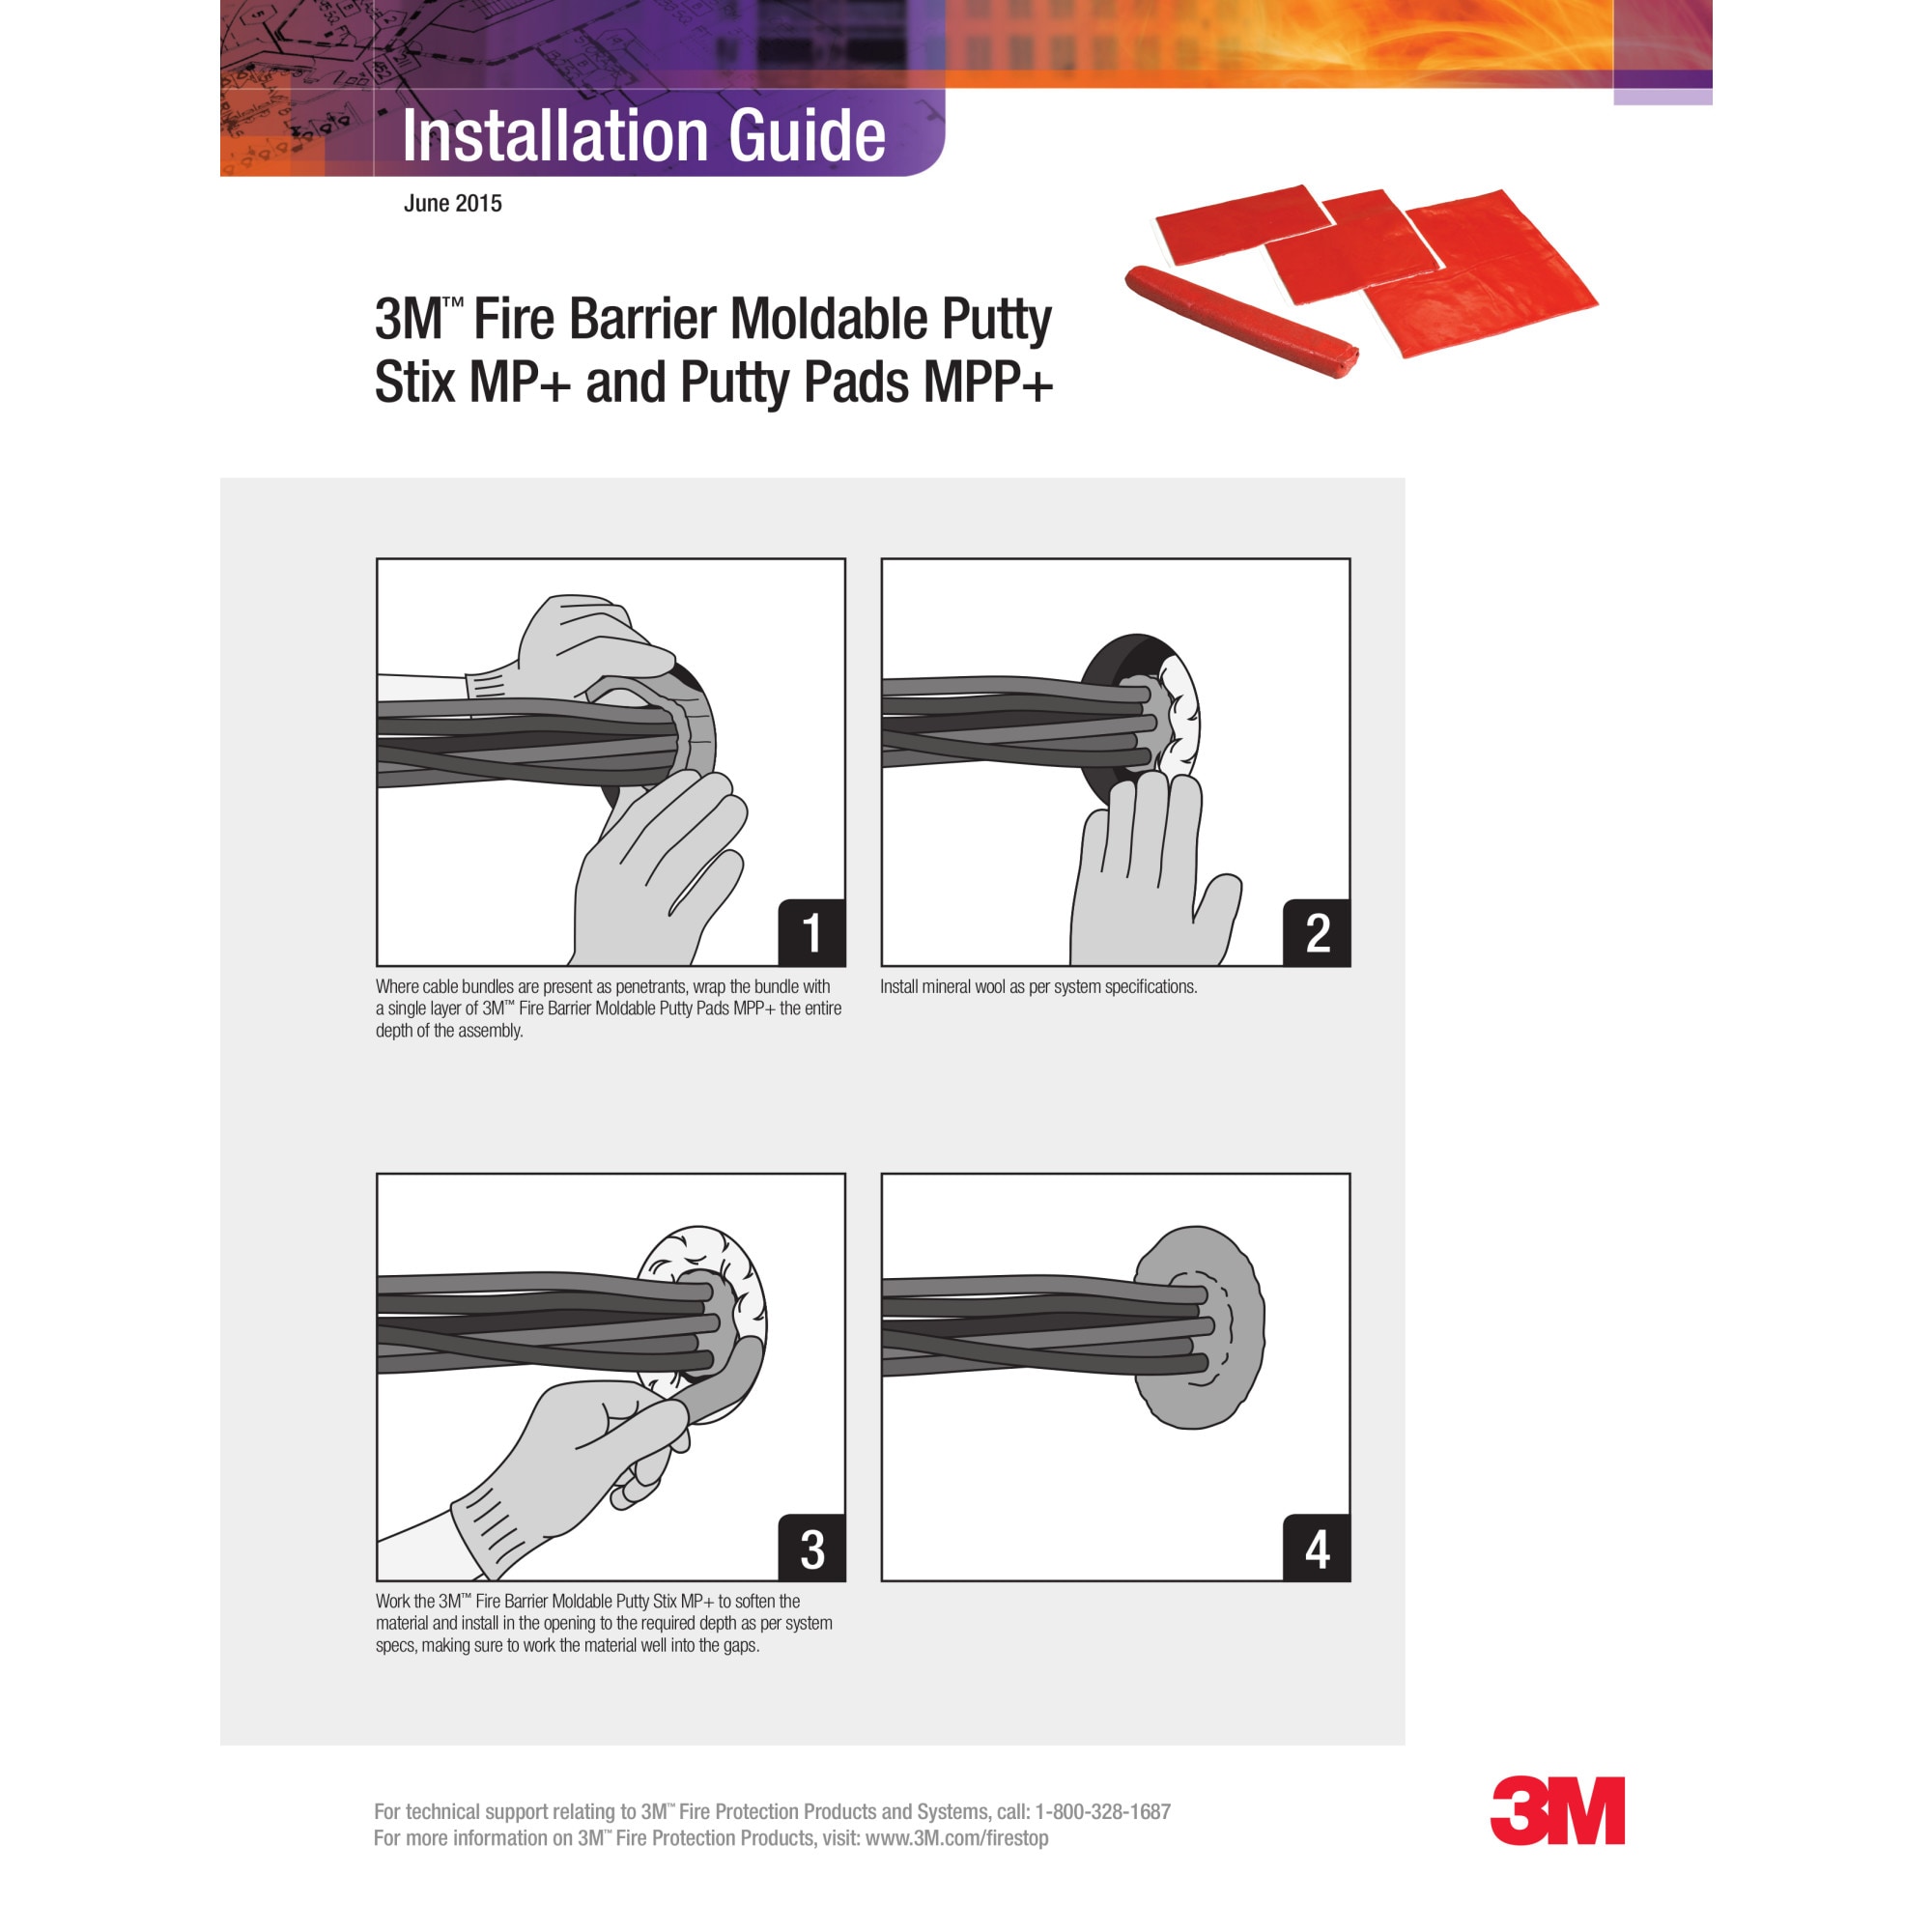 3M Fire Barrier Moldable Putty Stix MP+, 1.45 in x 6 in 